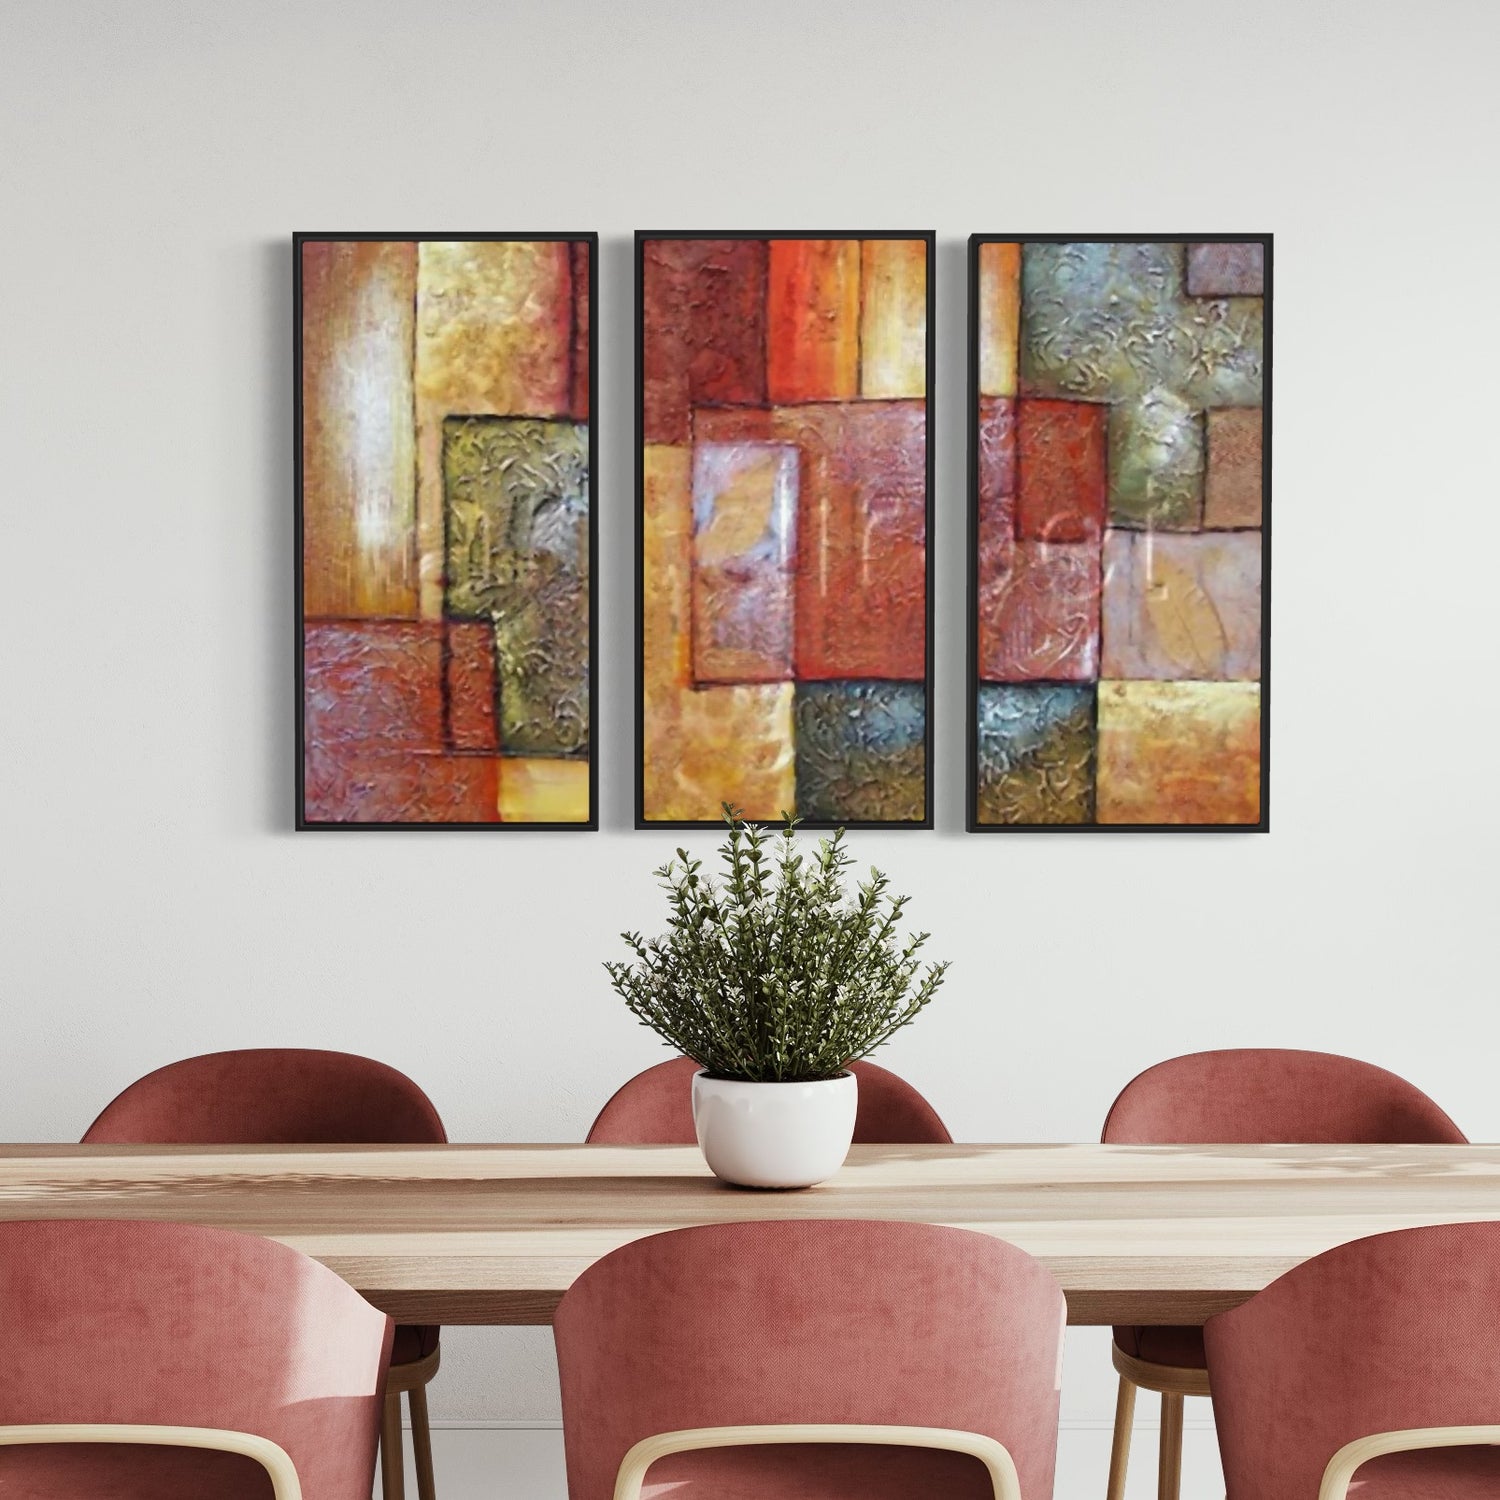 Halo of Tranquility 3 Panel Art: Colorful wall art